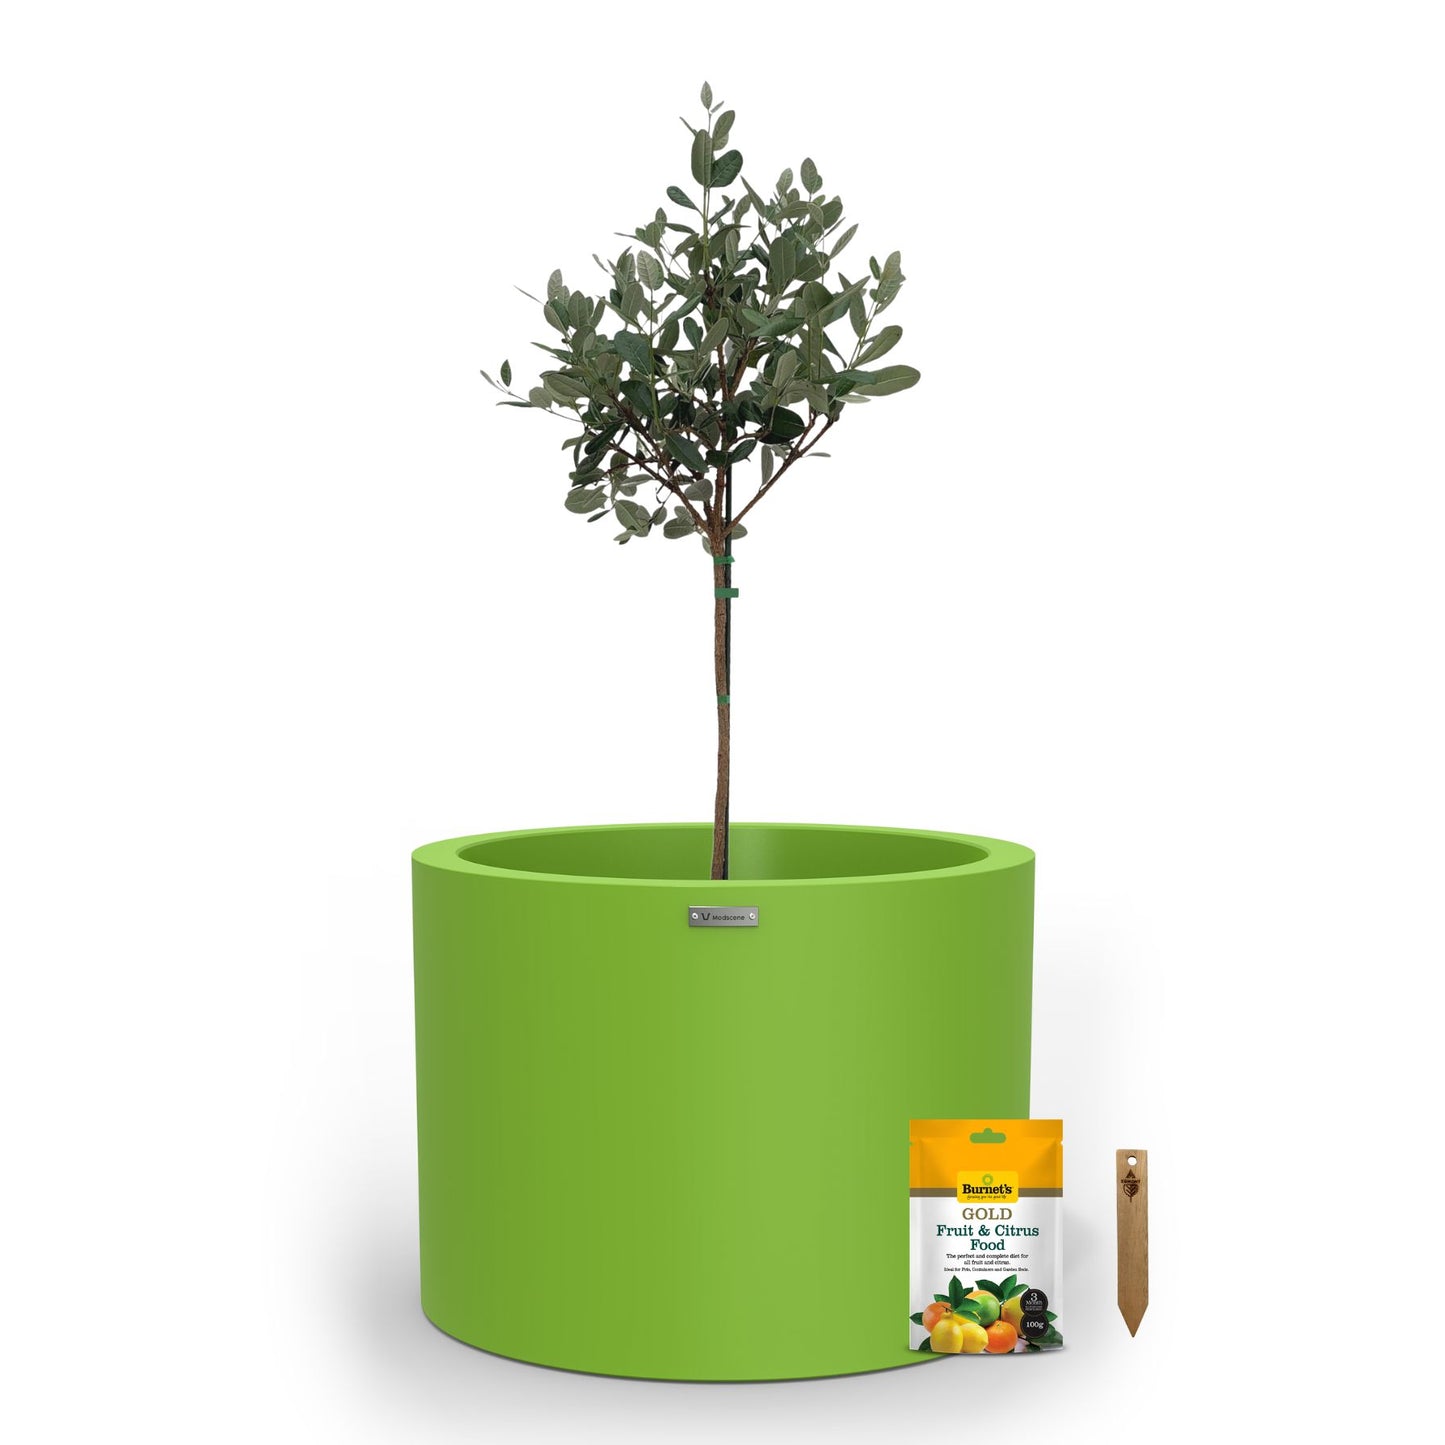 A large lime green planter pot used to plant fruit trees. 